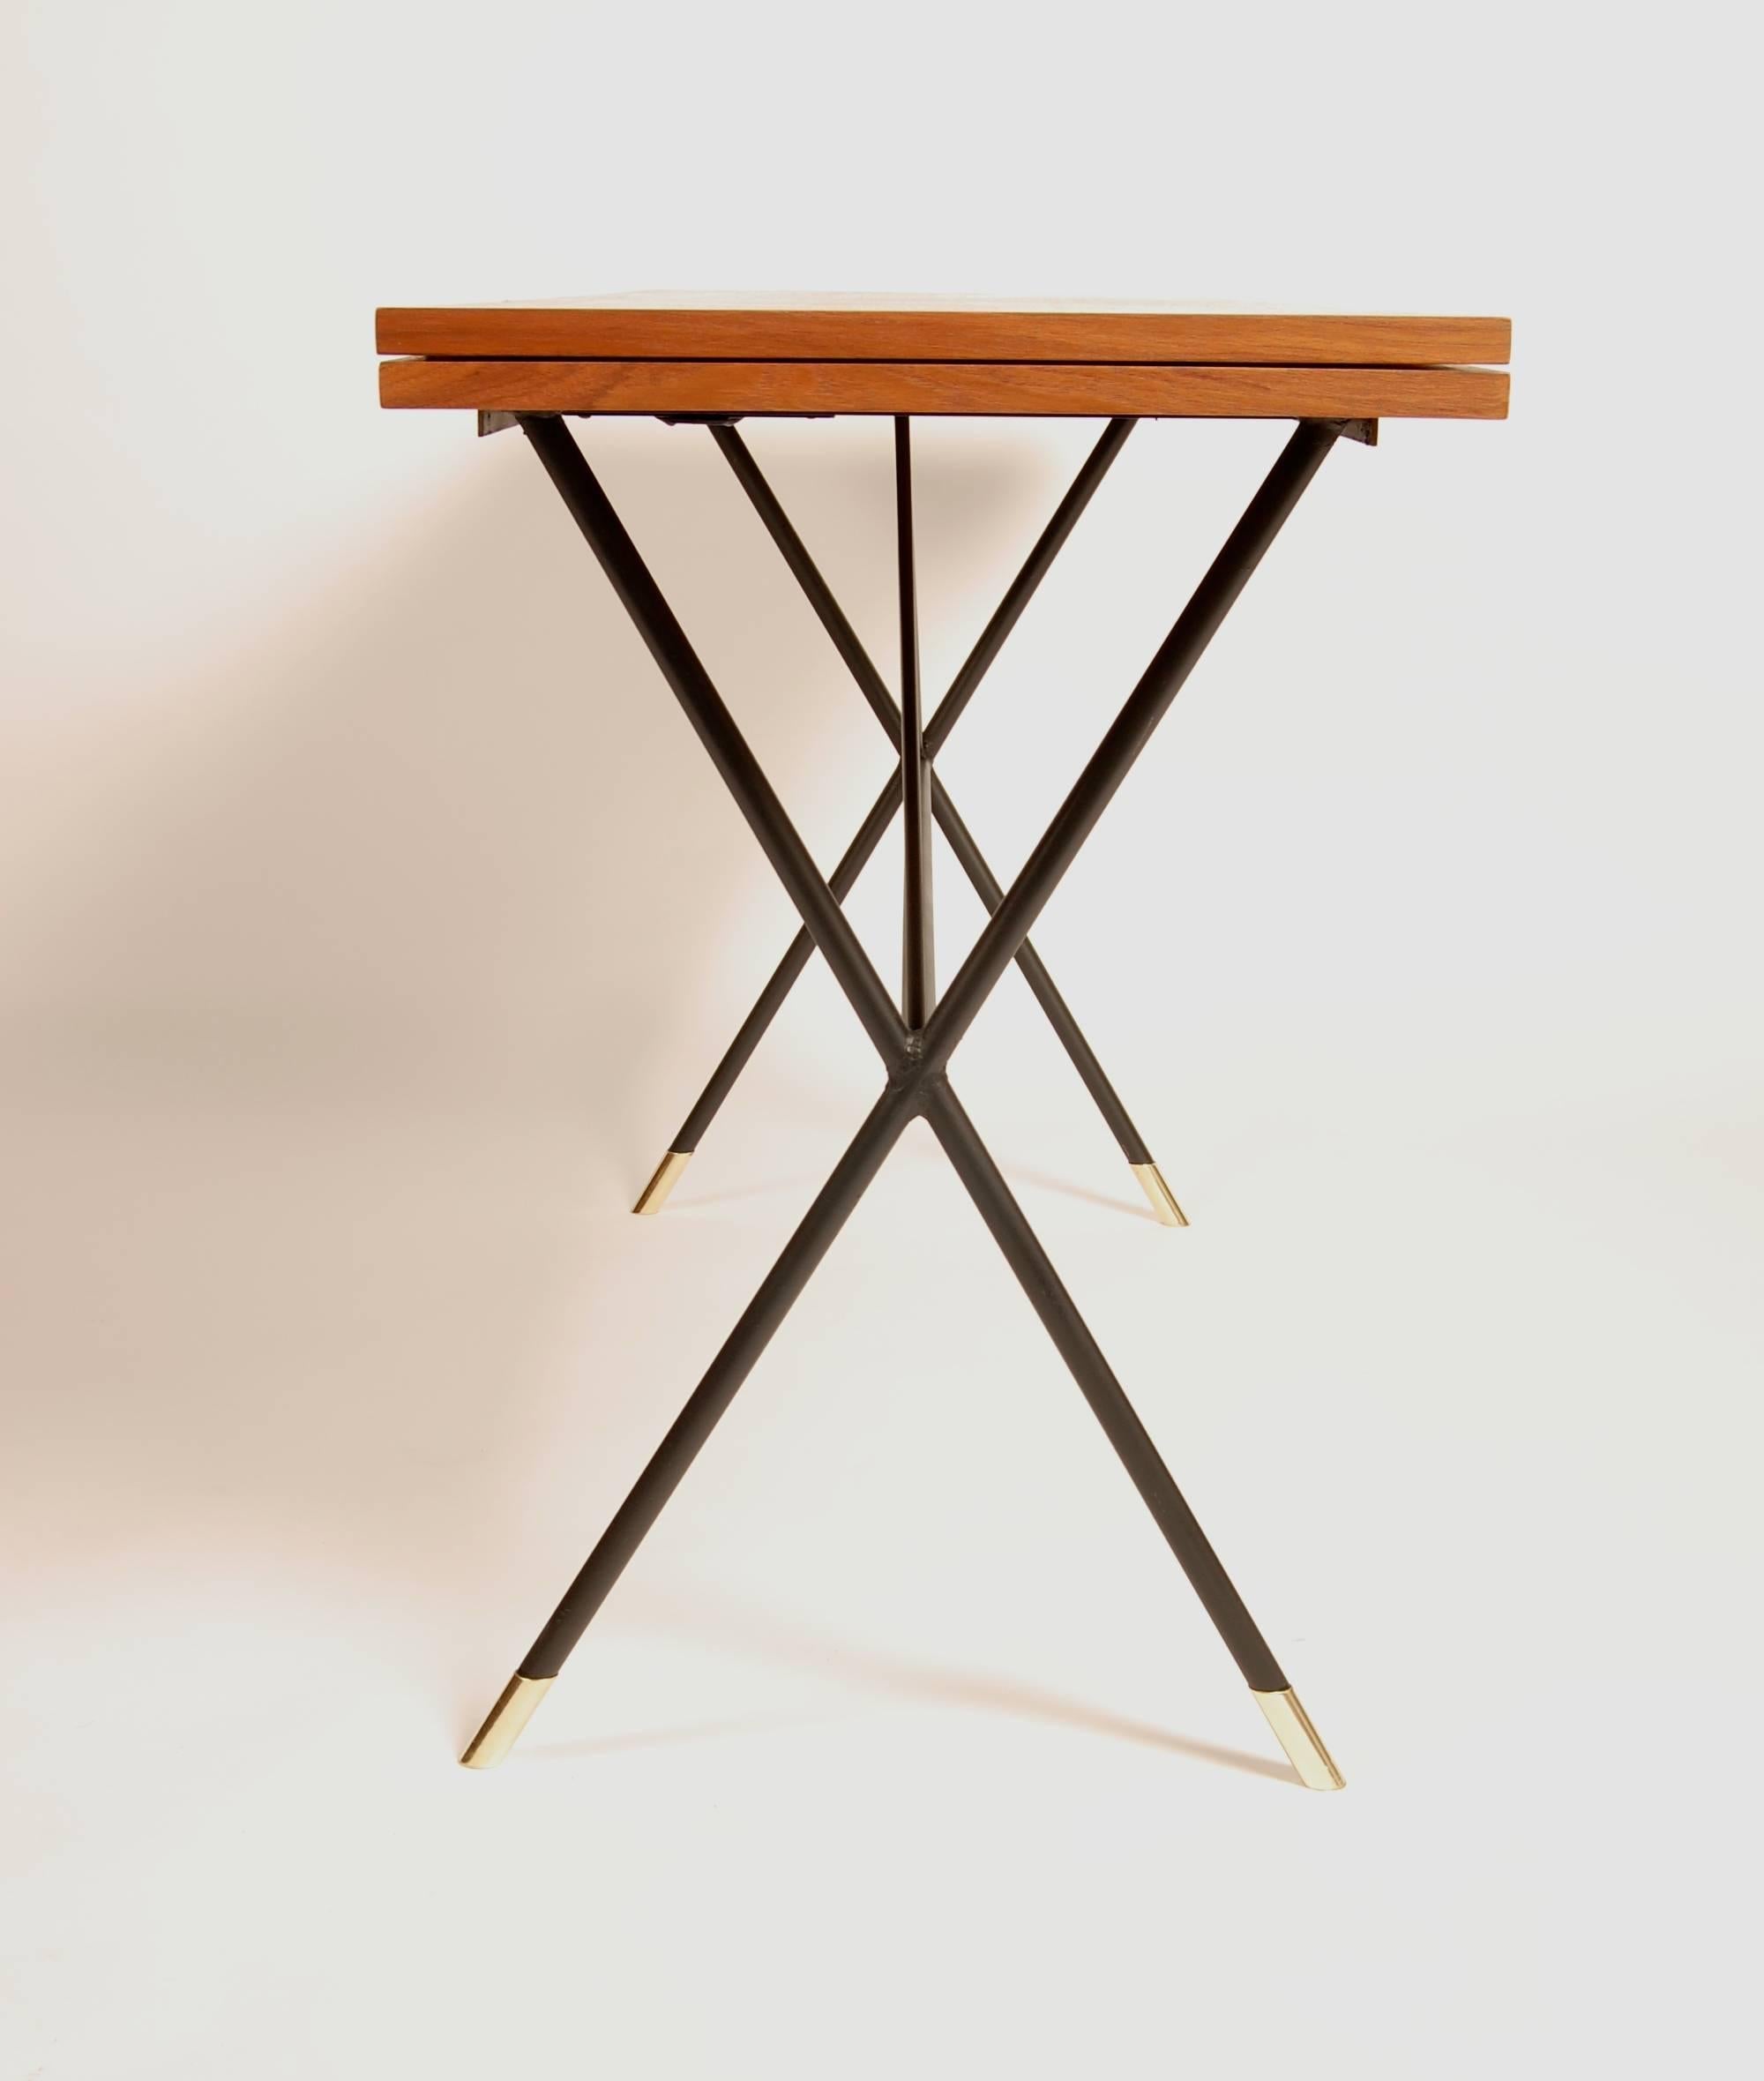 Modernist dual function console table that converts to a dining table. The iron X - base frame has an architectural approach to its design and is neatly finished with brass sabots. The teak top has amazing graining with very pronounced Cathedrals